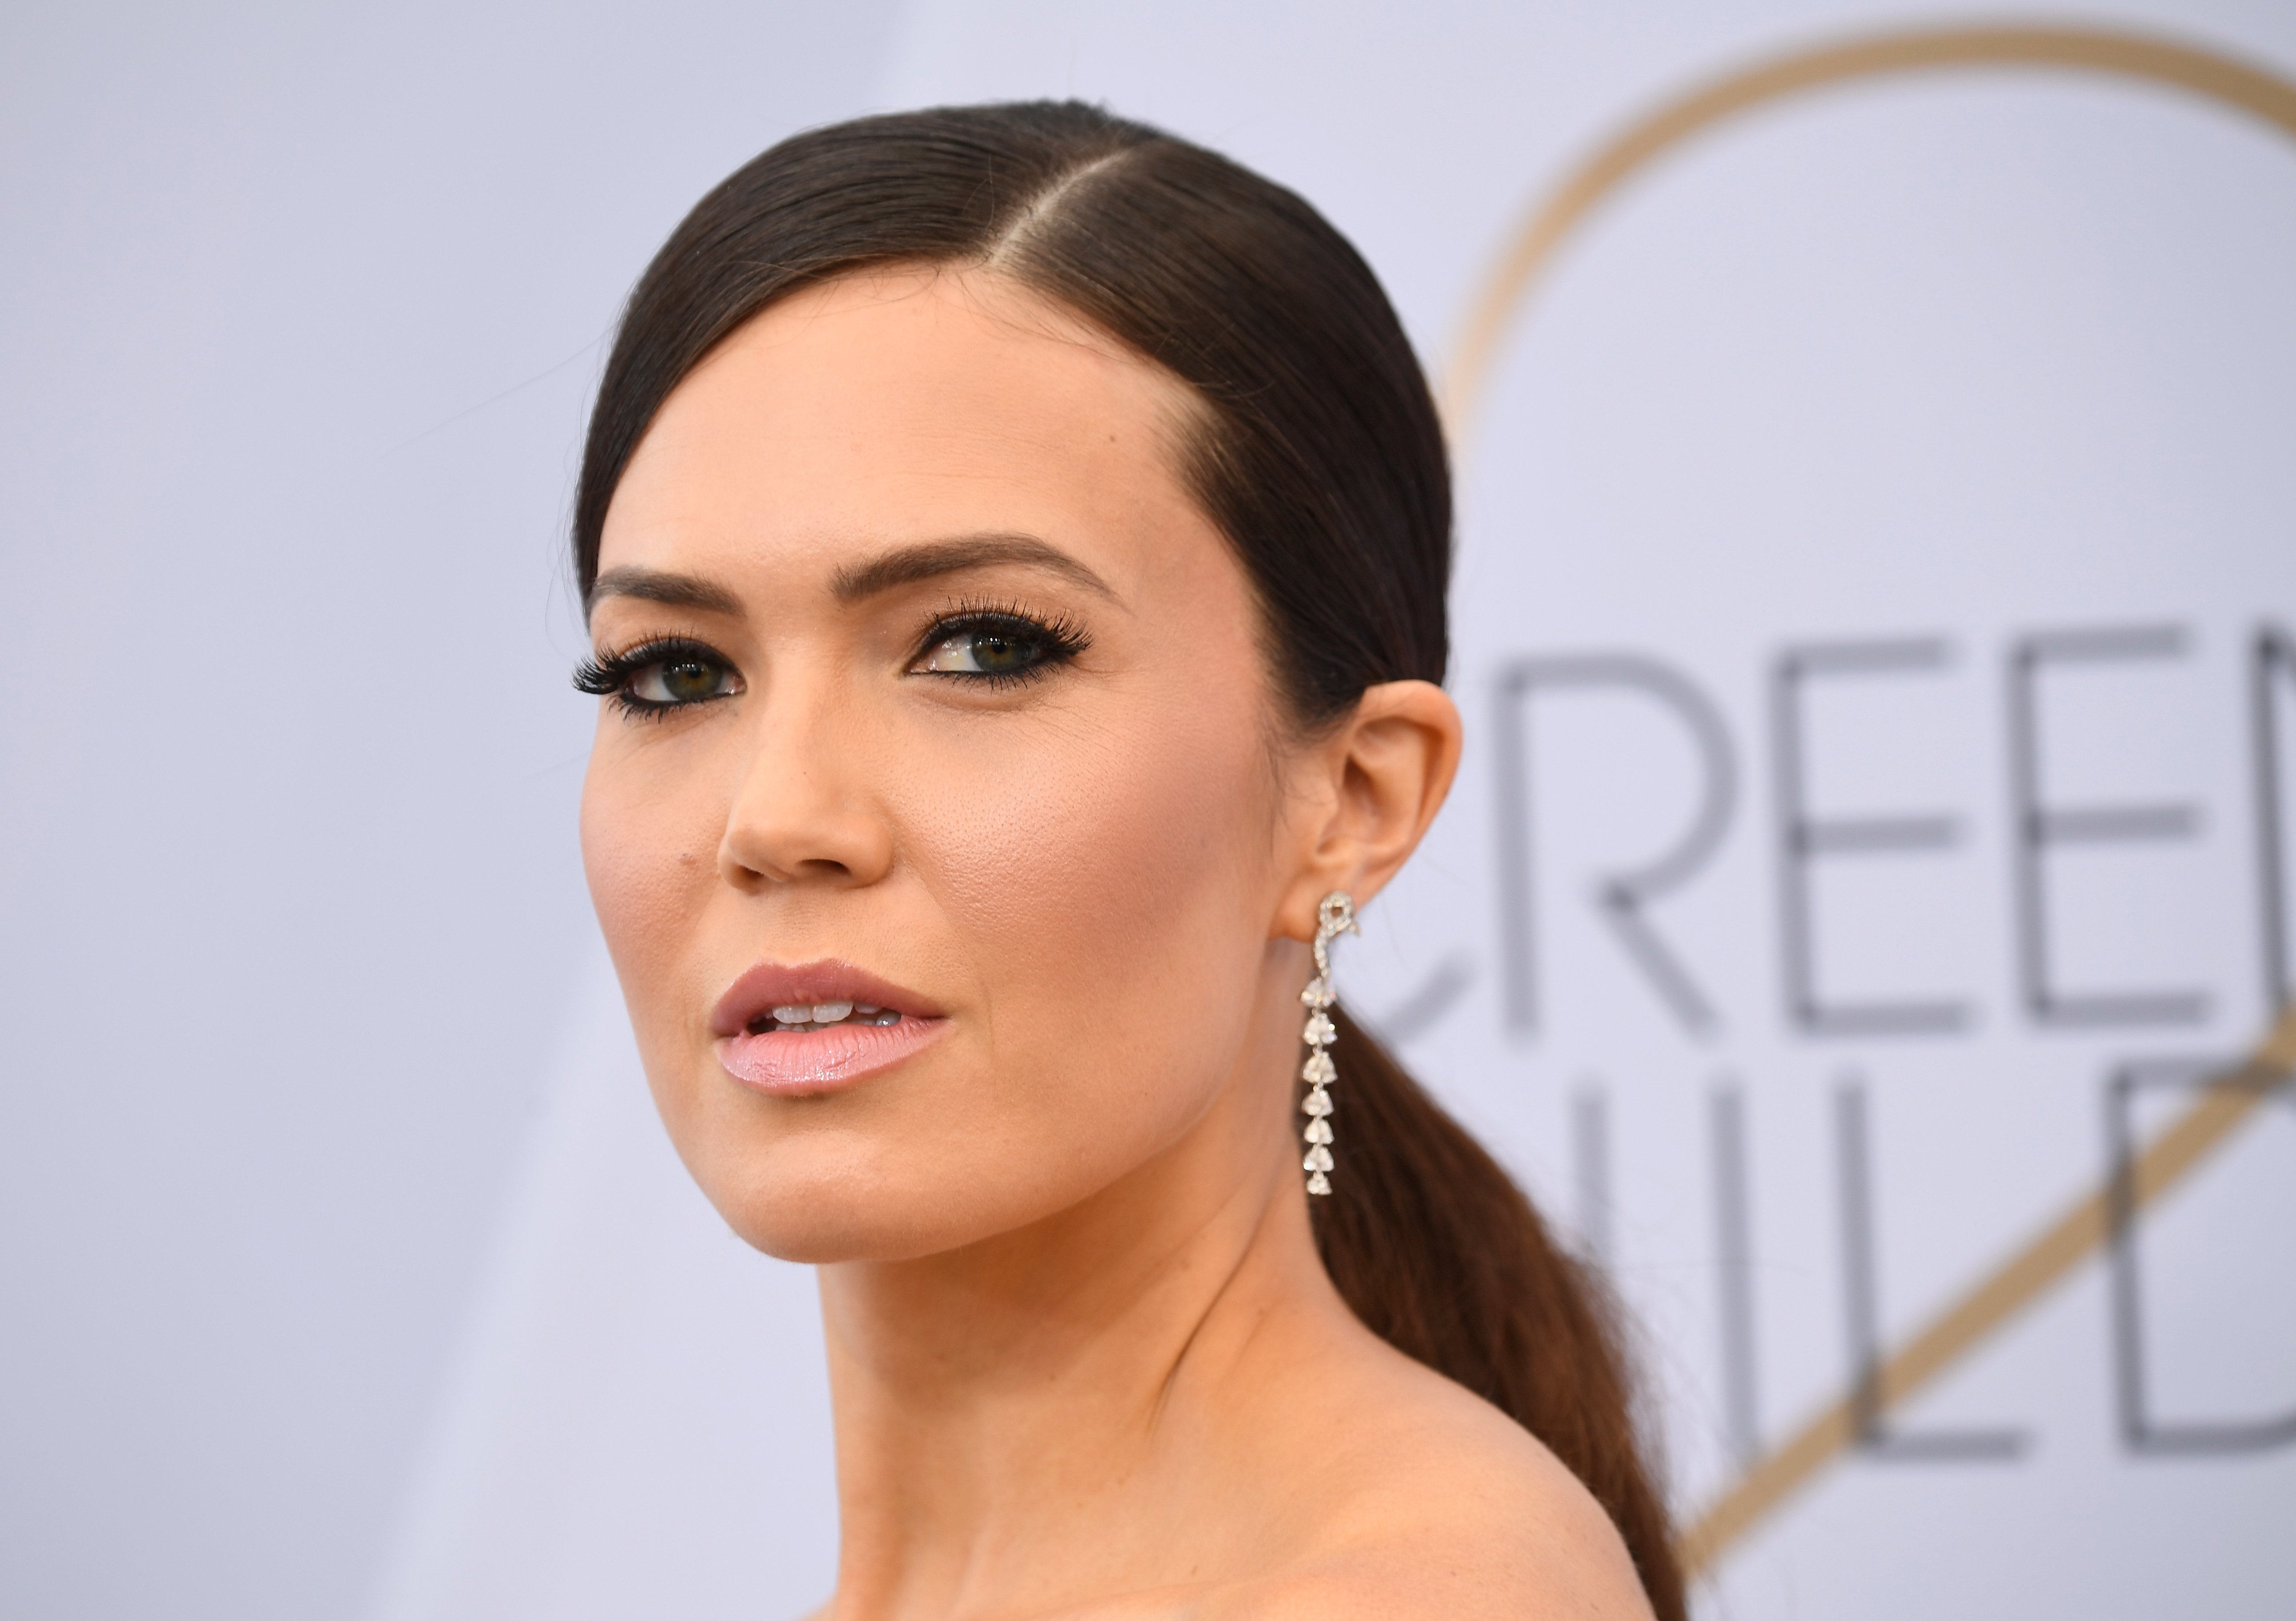 Mandy Moore attends the 25th Annual Screen Actors Guild Awards on January 27, 2019, in Los Angeles, California. | Photo: Getty Images